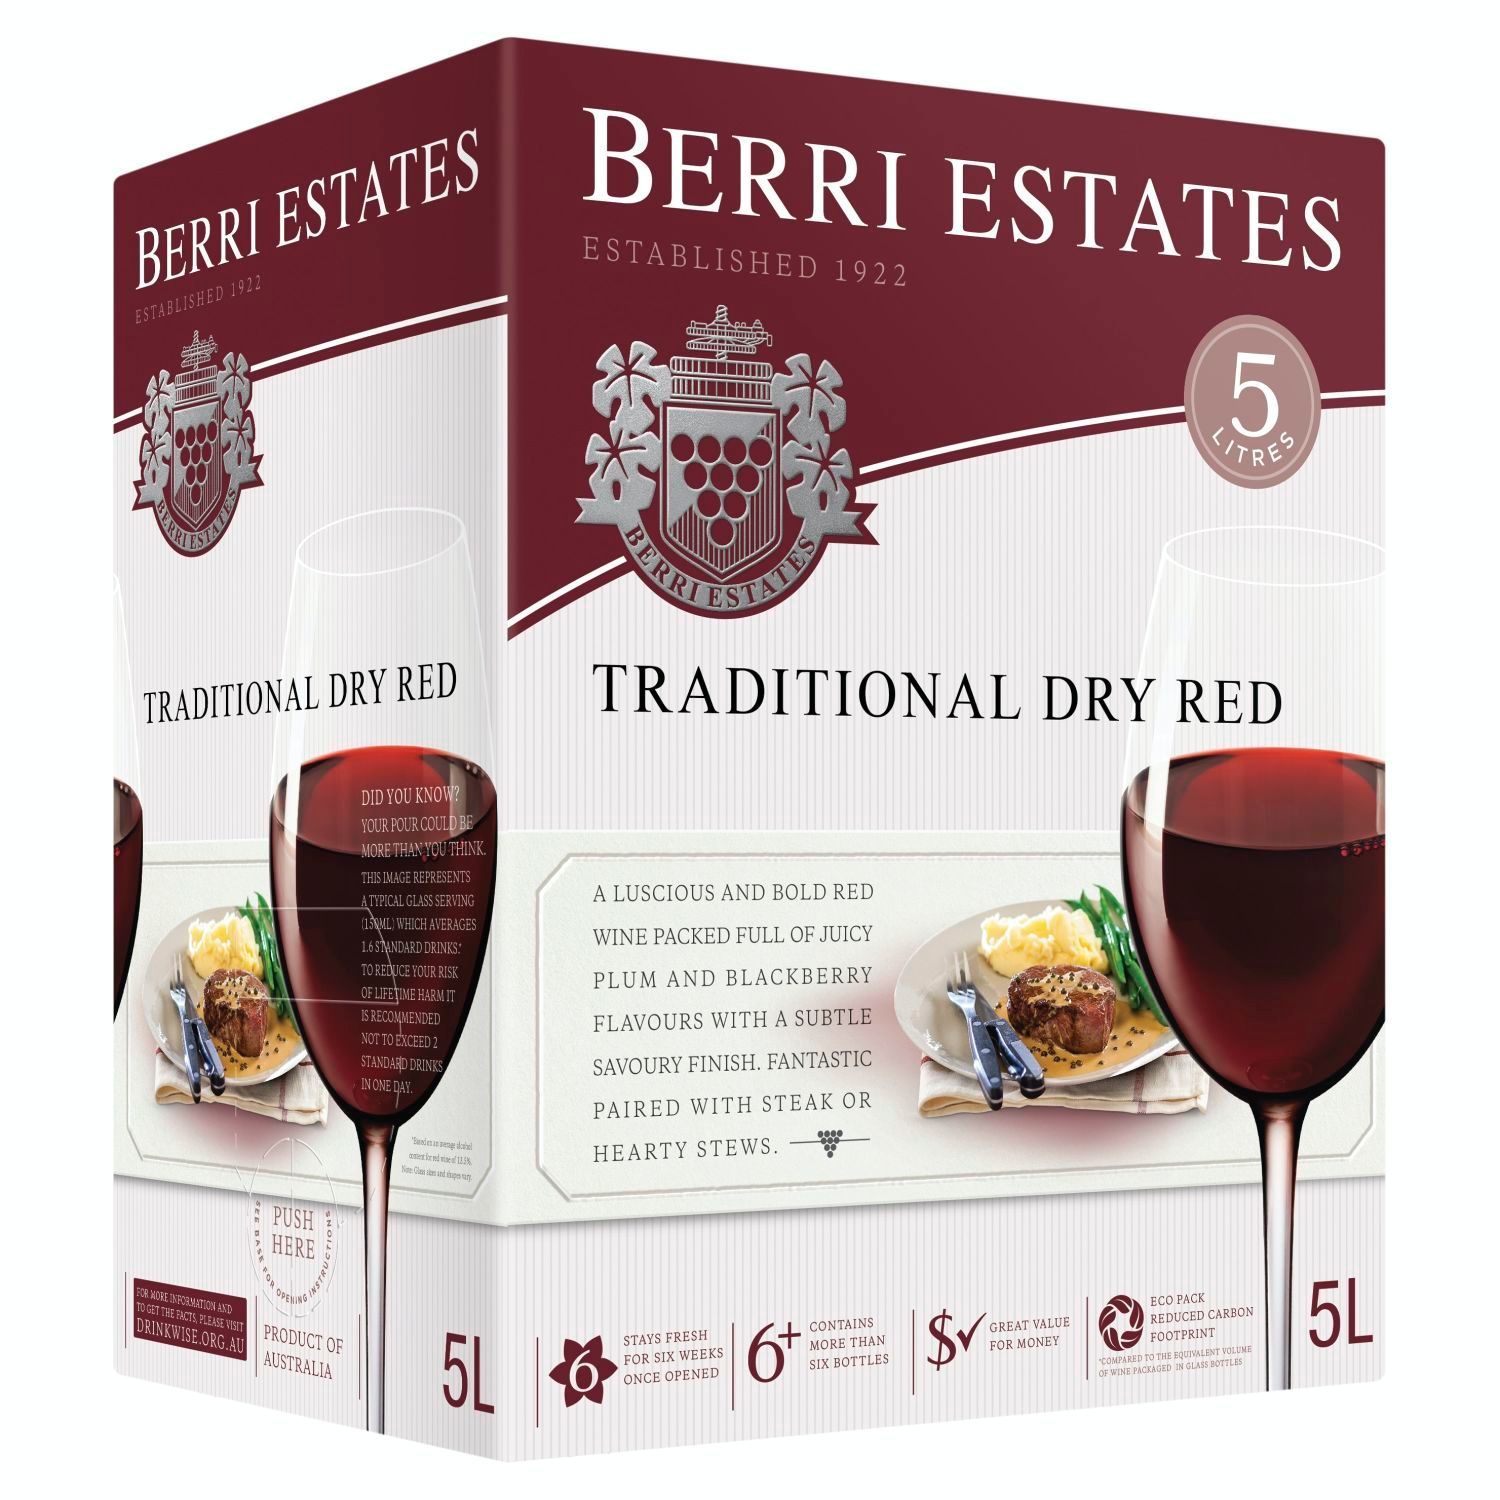 Berri Traditional Dry Red comes in a great value five litre cask. It is soft and approachable, which makes it appealing to most palates and a great choice if you're catering for a large group. A great everyday wine to keep on hand.<br /> <br />Alcohol Volume: 12.50%<br /><br />Pack Format: Cask<br /><br />Standard Drinks: 8.2</br /><br />Pack Type: Cask<br /><br />Country of Origin: Australia<br /><br />Region: South Eastern Australia<br /><br />Vintage: Non Vintage<br />